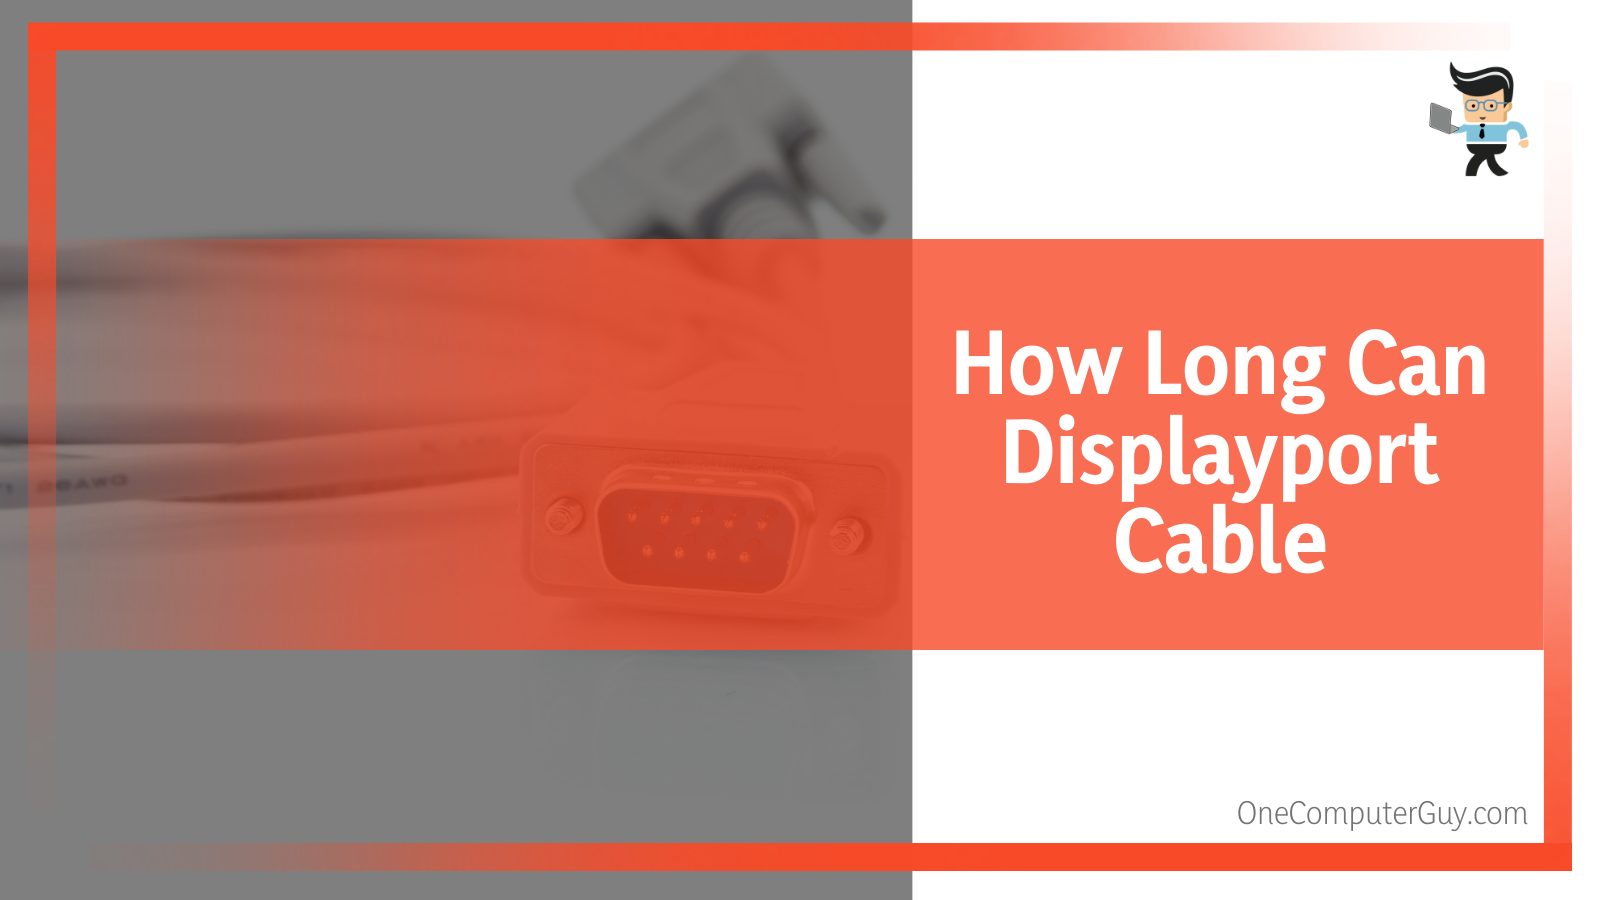 How Long Can Displayport Cable